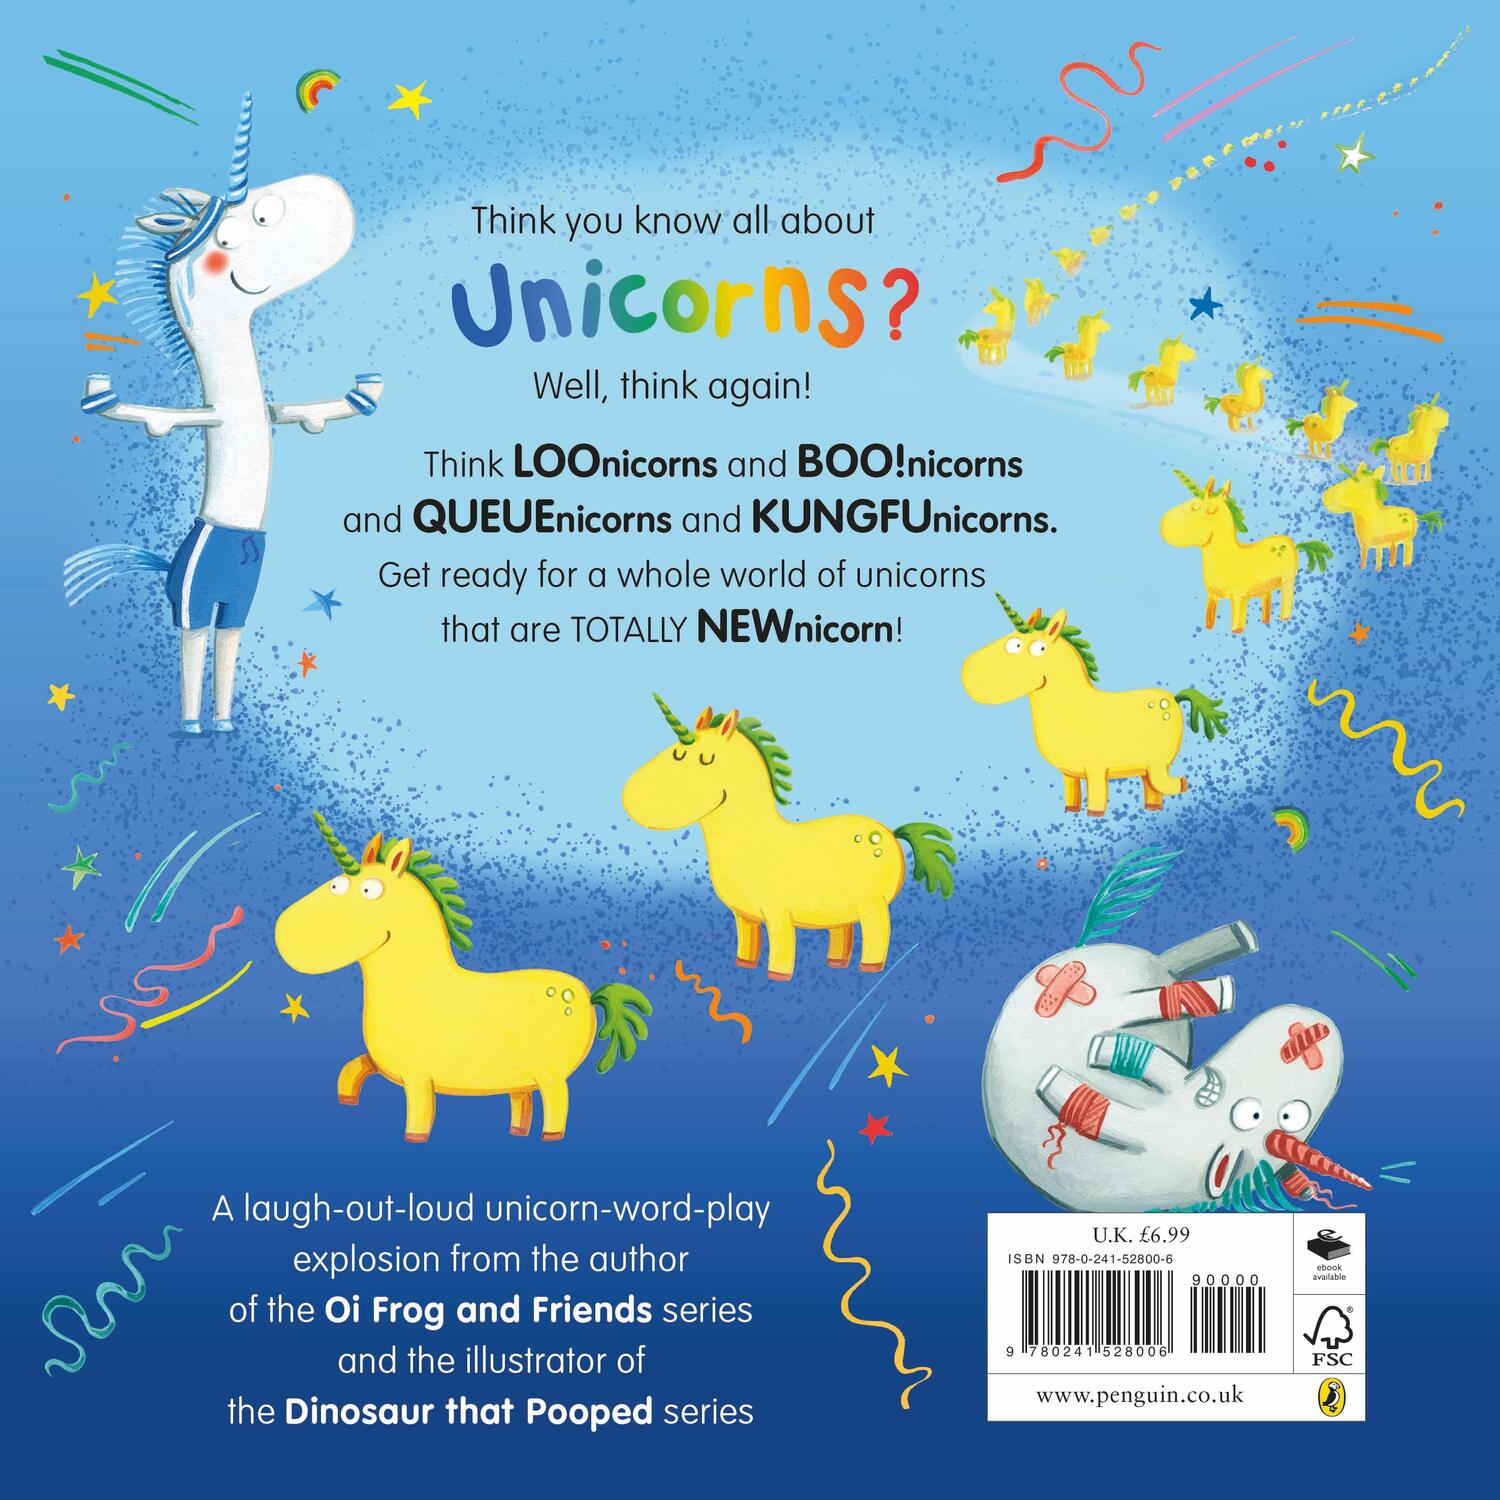 Rückseite: 9780241528006 | The Who's Whonicorn of Unicorns | from the author of Oi Frog! | Gray